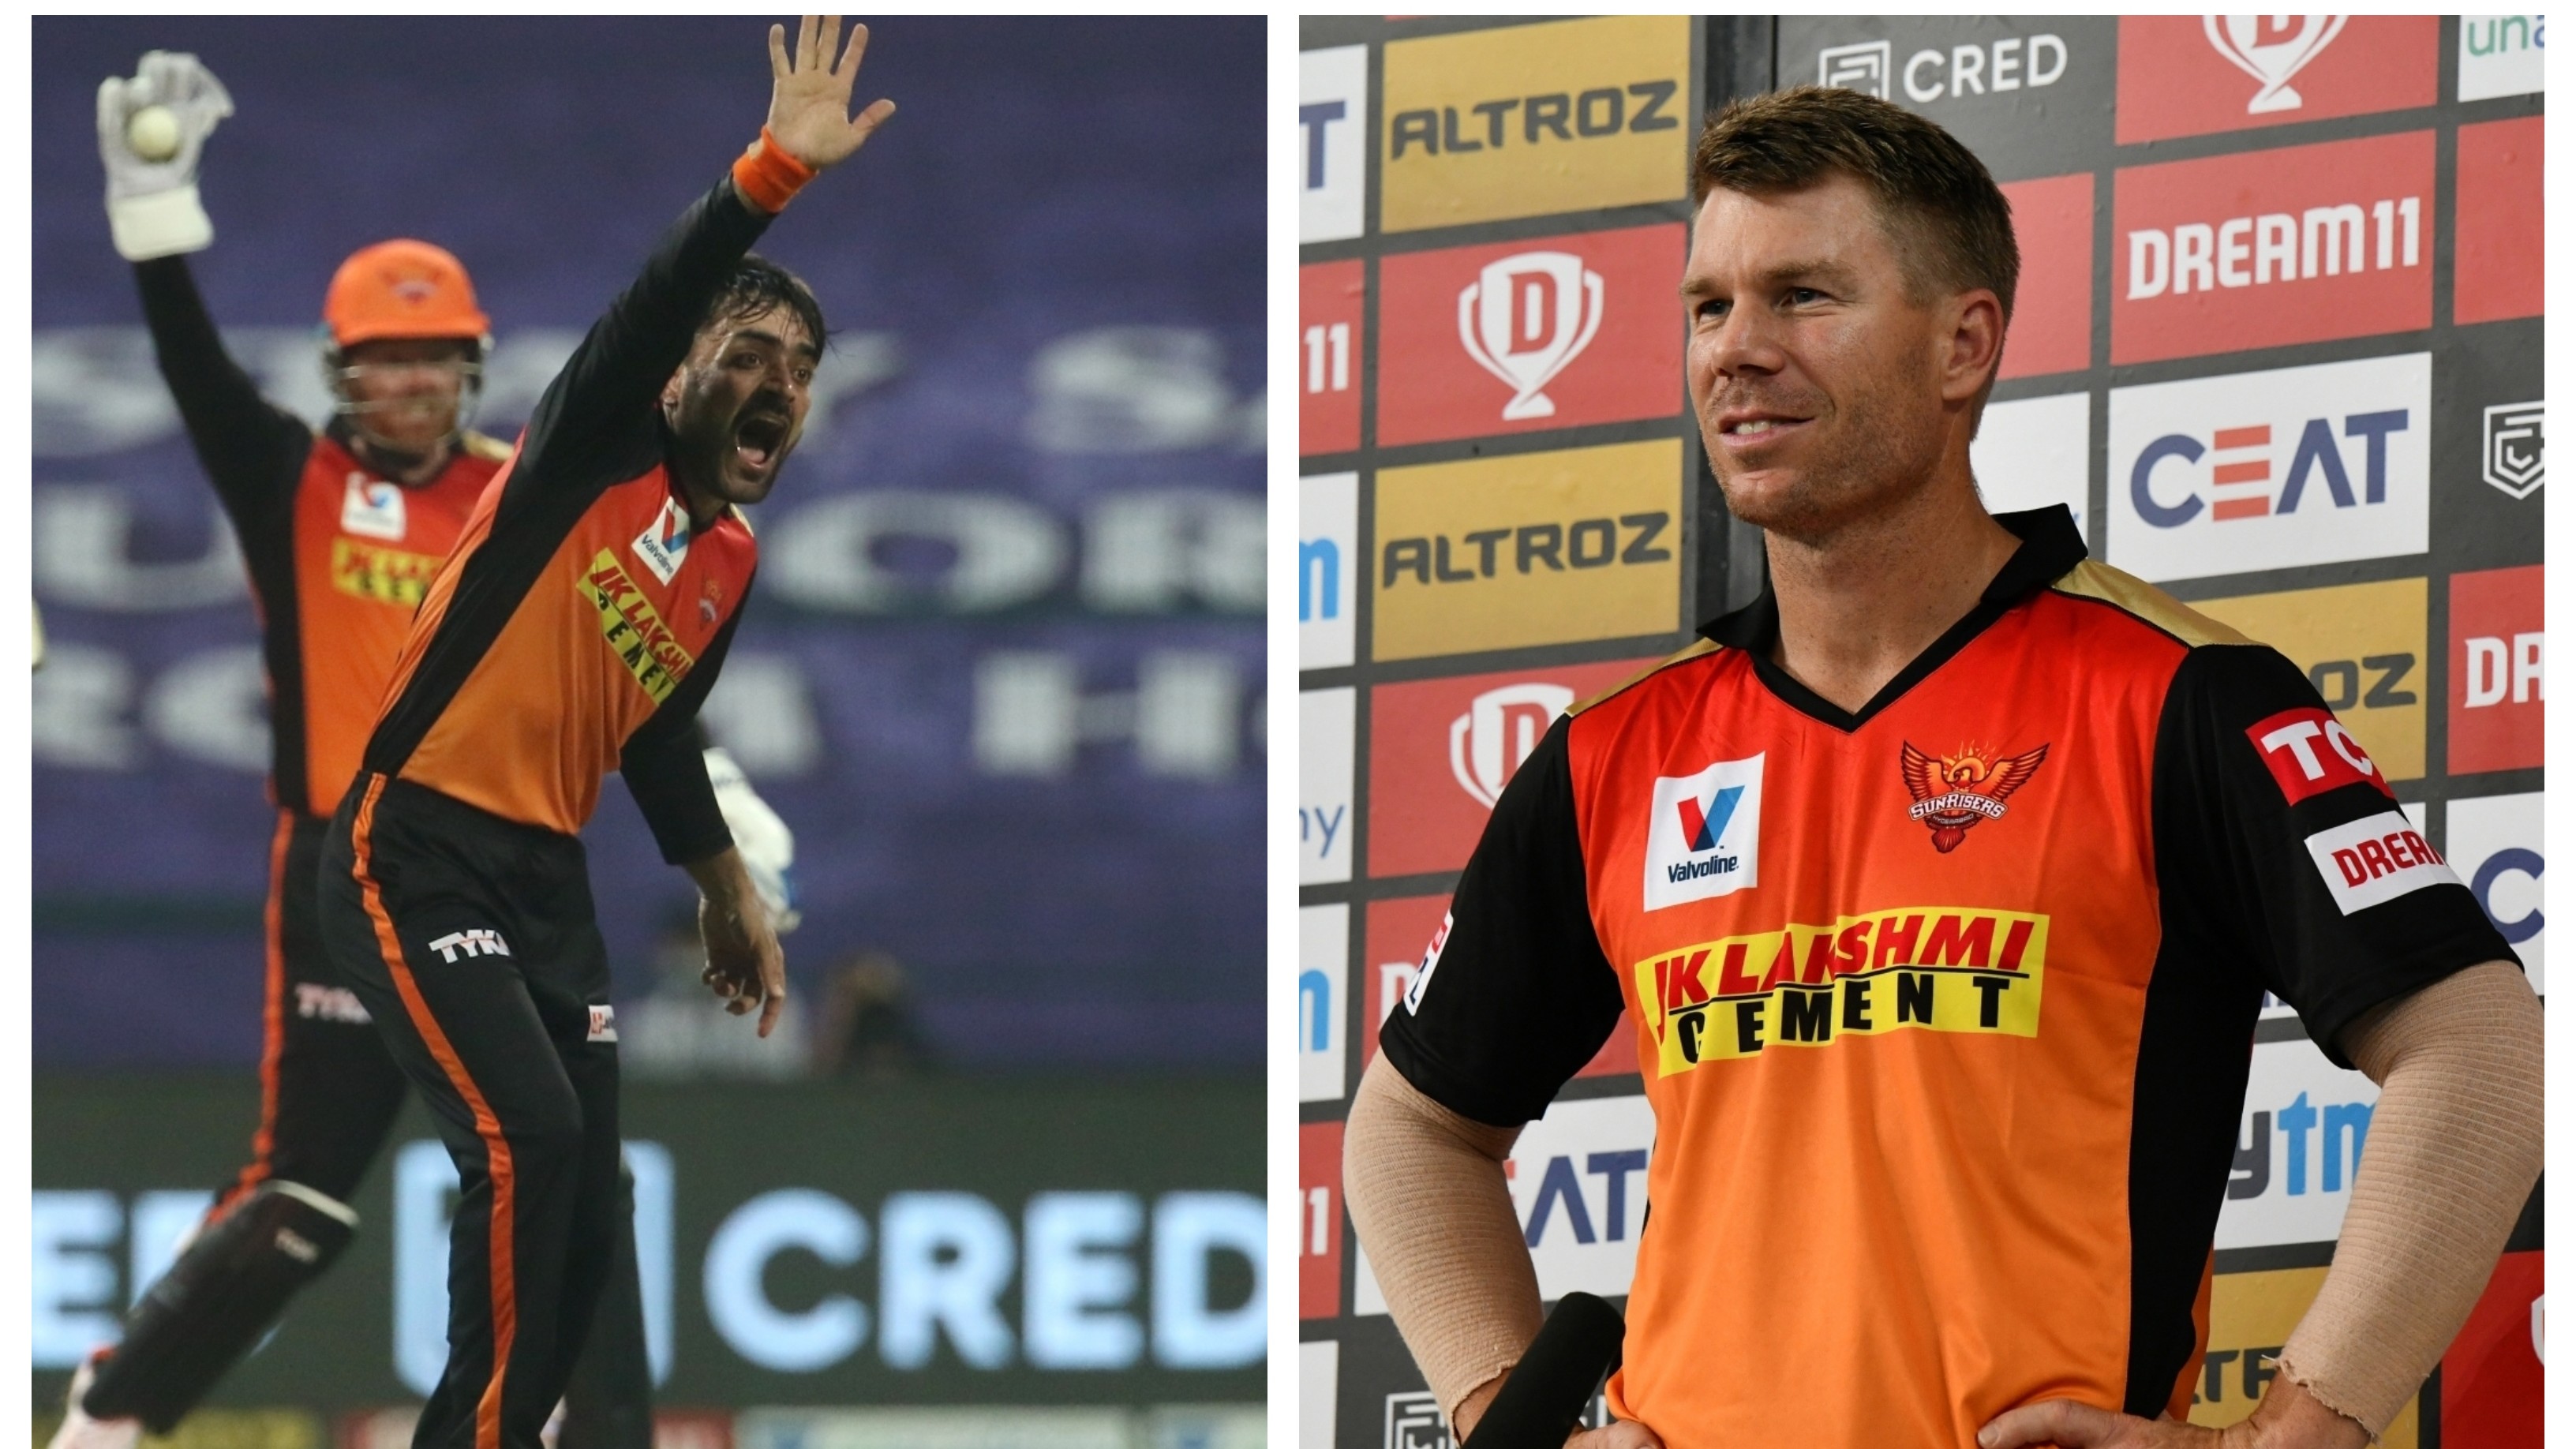 IPL 2020: ‘He's a world-class bowler, always delivers in pressure situations’, Warner heaps praise on Rashid